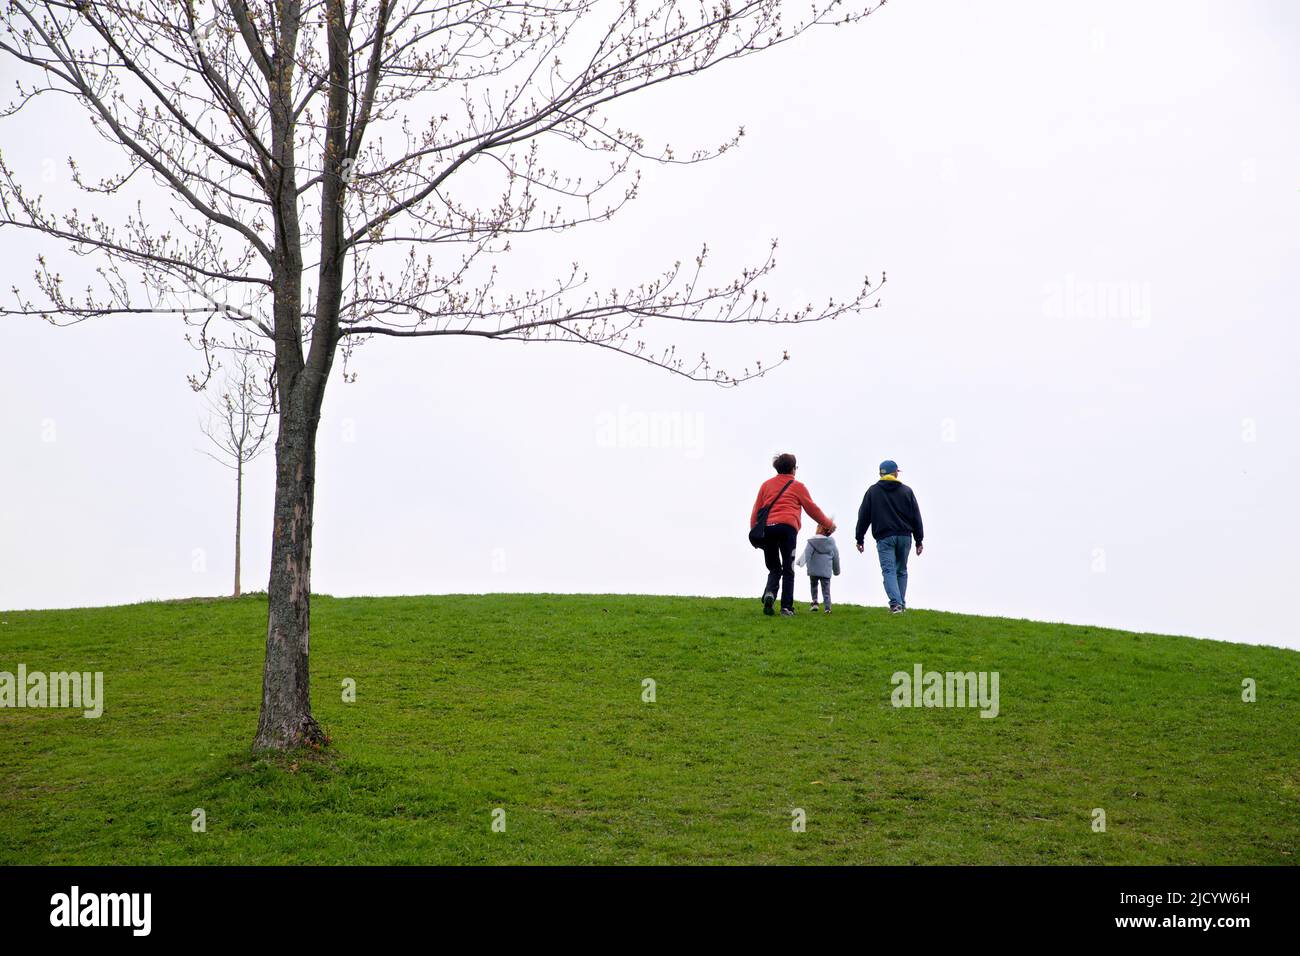 Family walking in the public park. A healthy lifestyle. Stock Photo